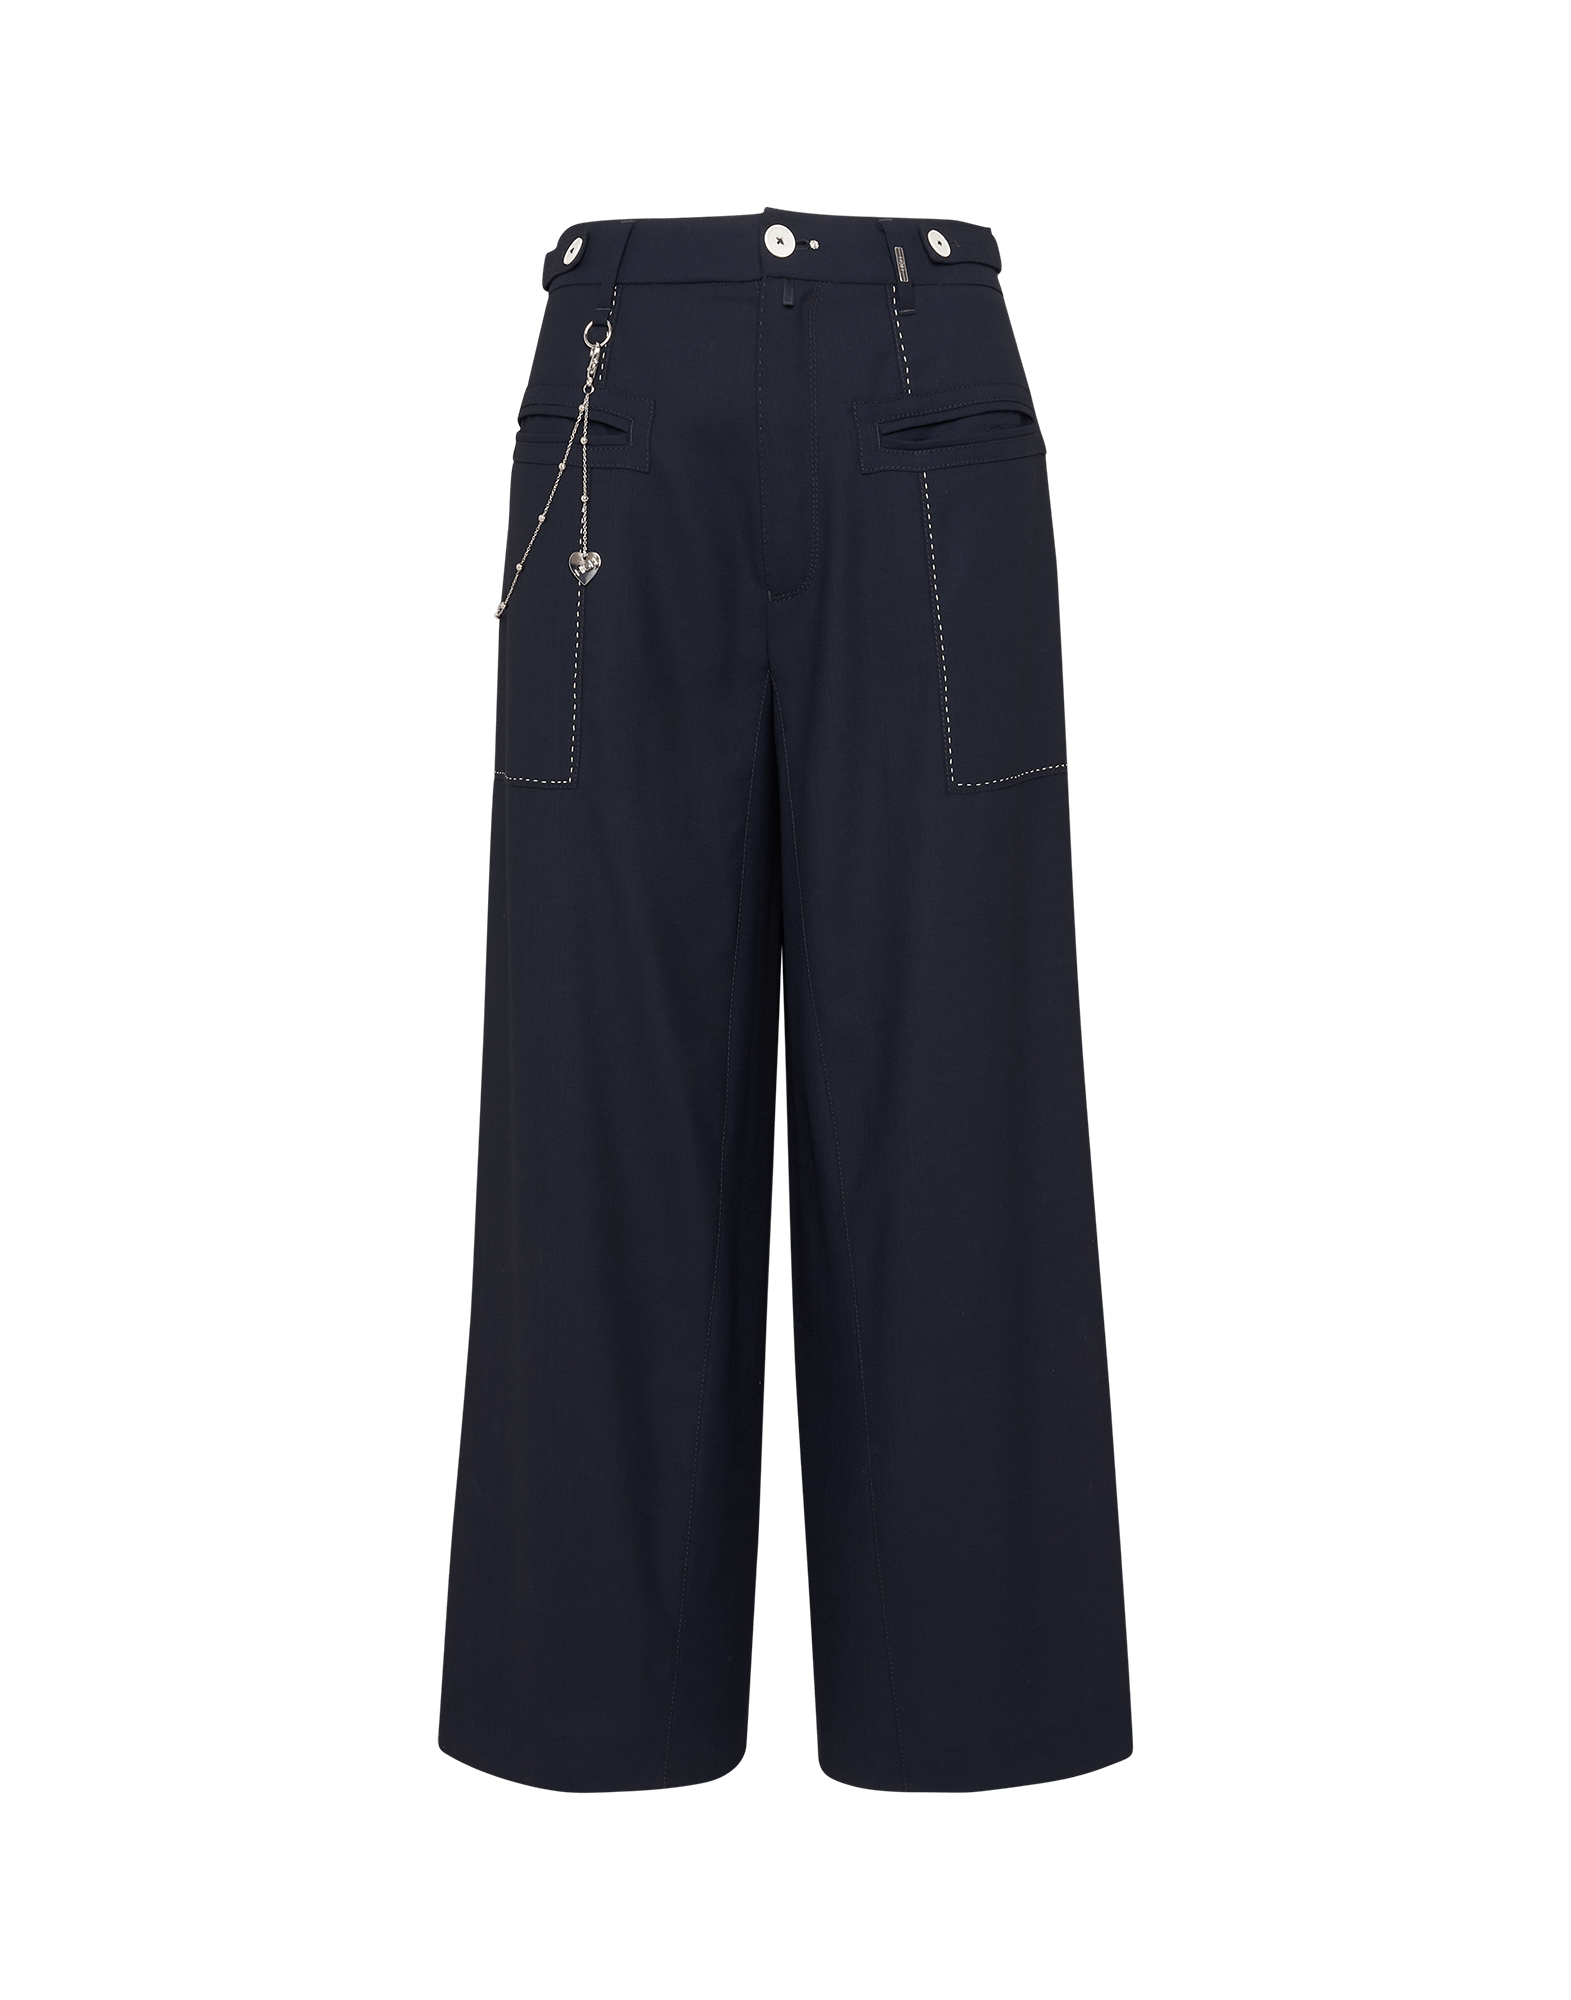 TACTFUL: Wide leg pants in navy with ivory tack stitching